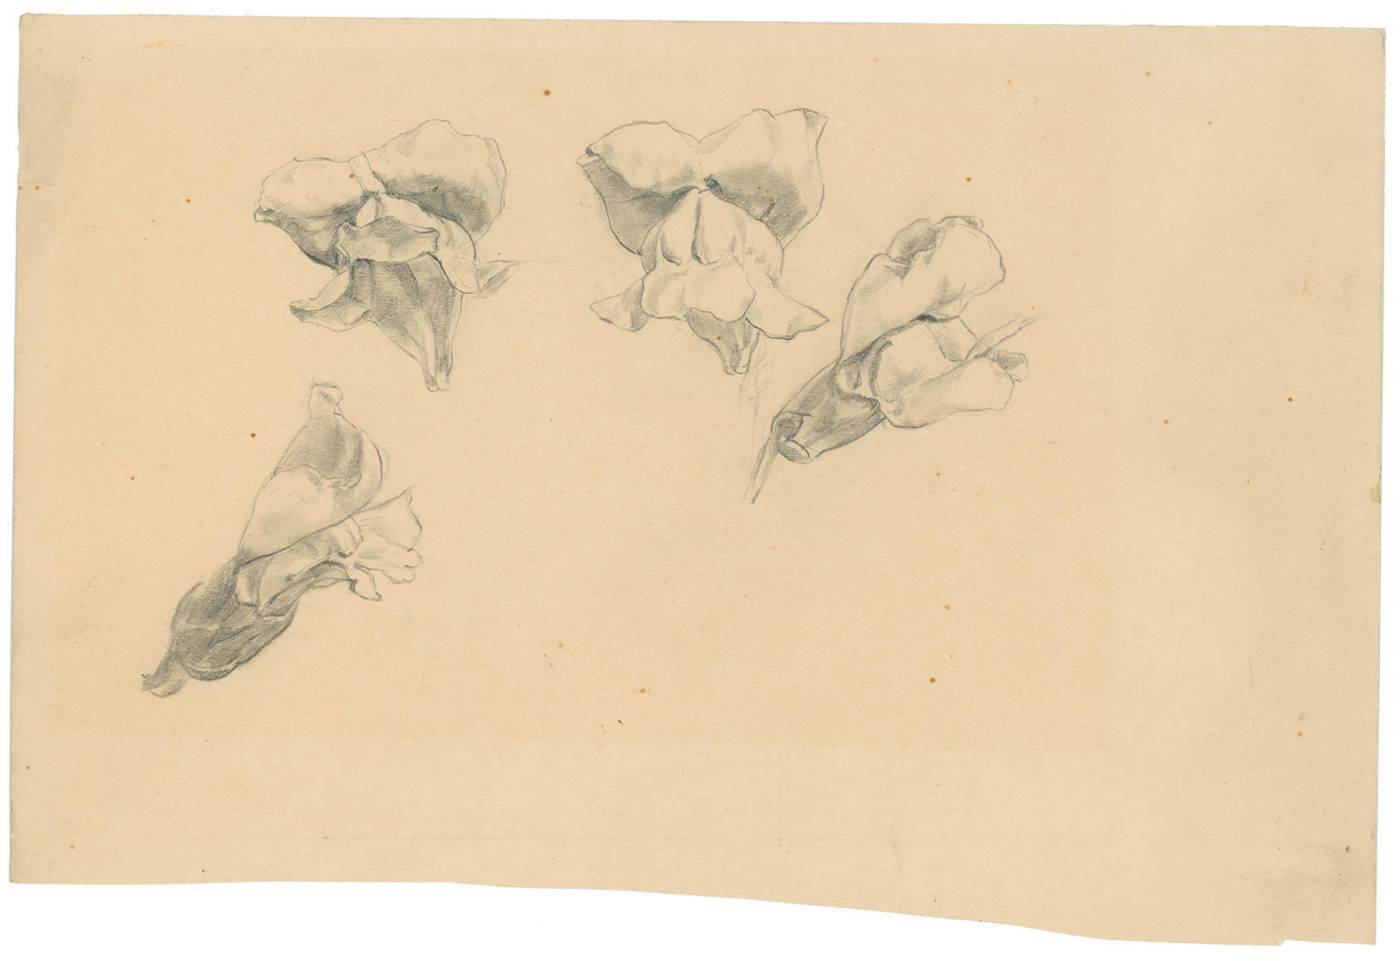 Sketches of snapdragons